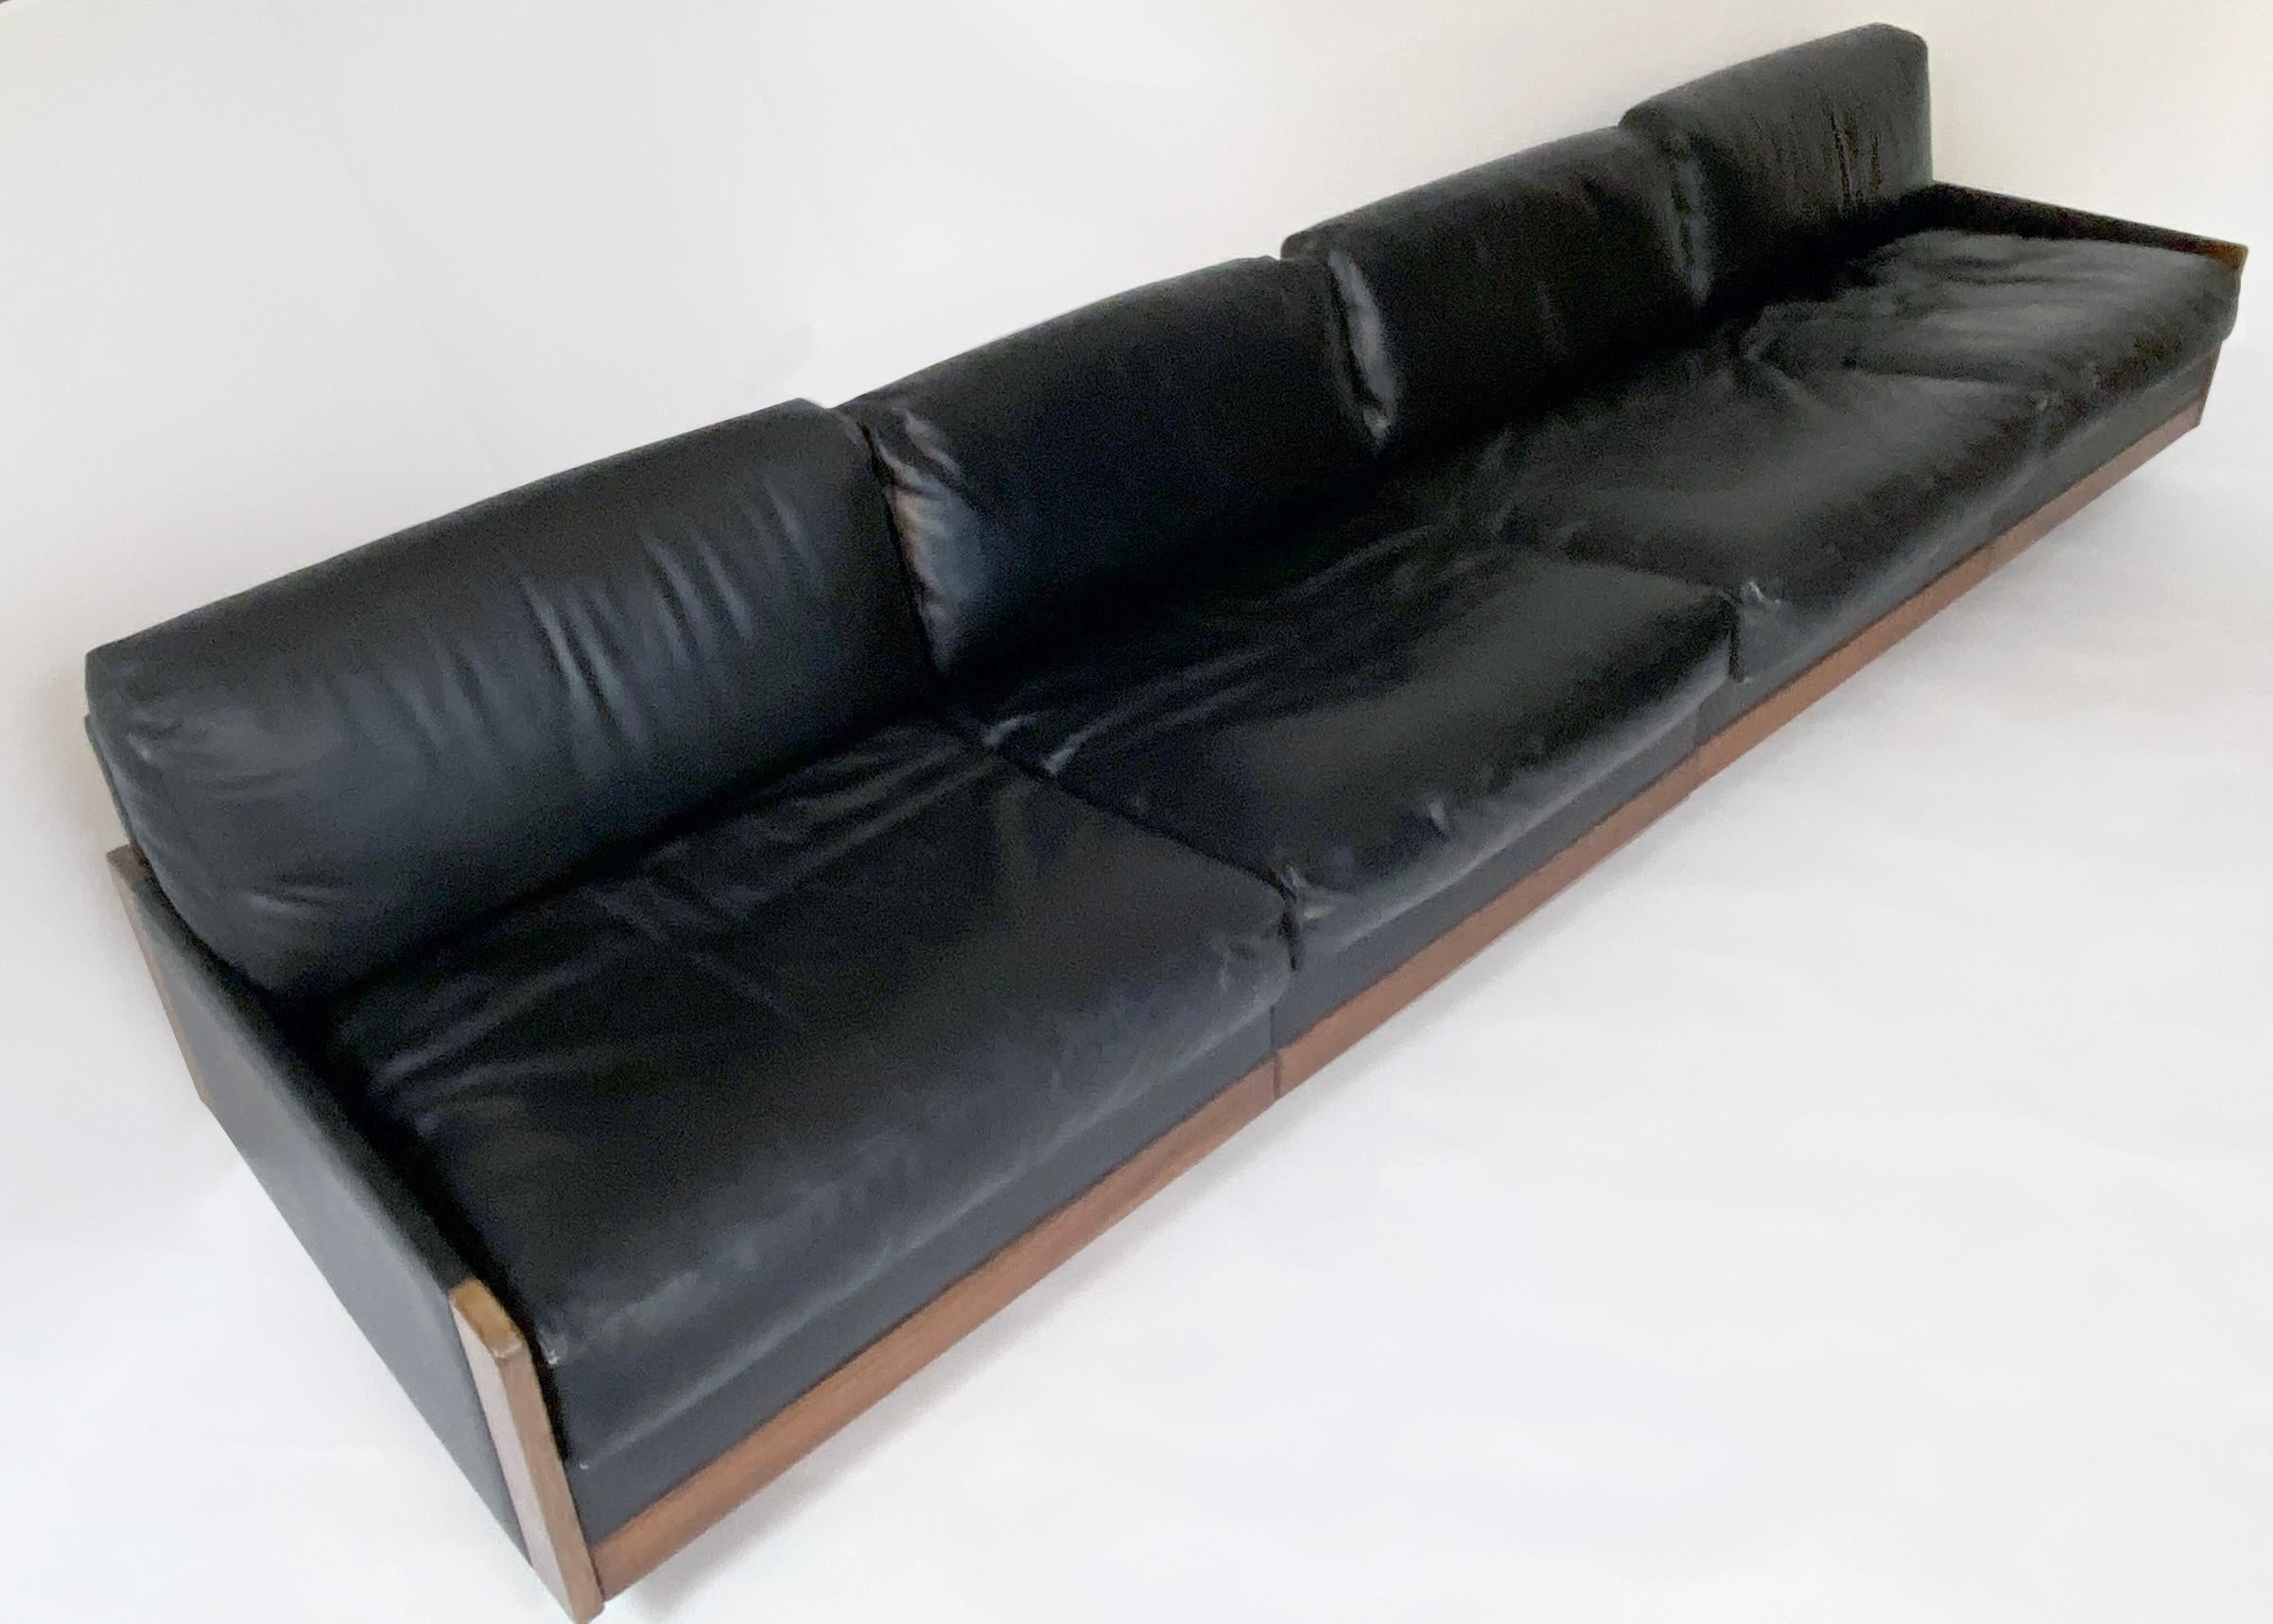 1970s four-seat sofa by Cassina, designed by Afra and Tobia Scarpa. Midcentury Italian design. Rosewood frame. The back, seating and back cushions are covered with a beautiful black leather. Model 920.
Measures: Seat height 14